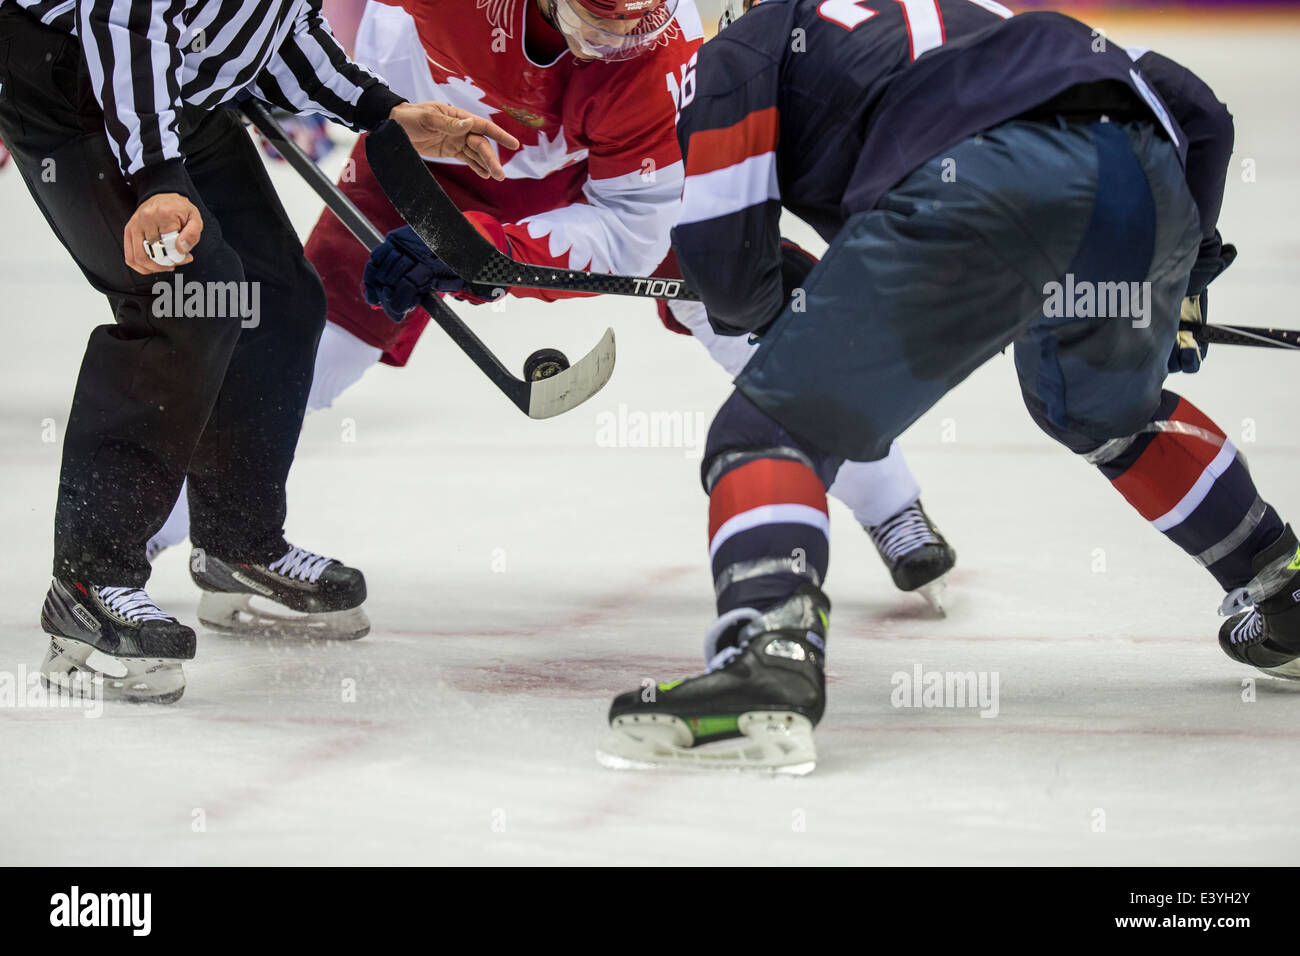 Face Off during ice hockey game RUS vs USA at the Olympic Winter Games, Sochi 2014 Stock Photo